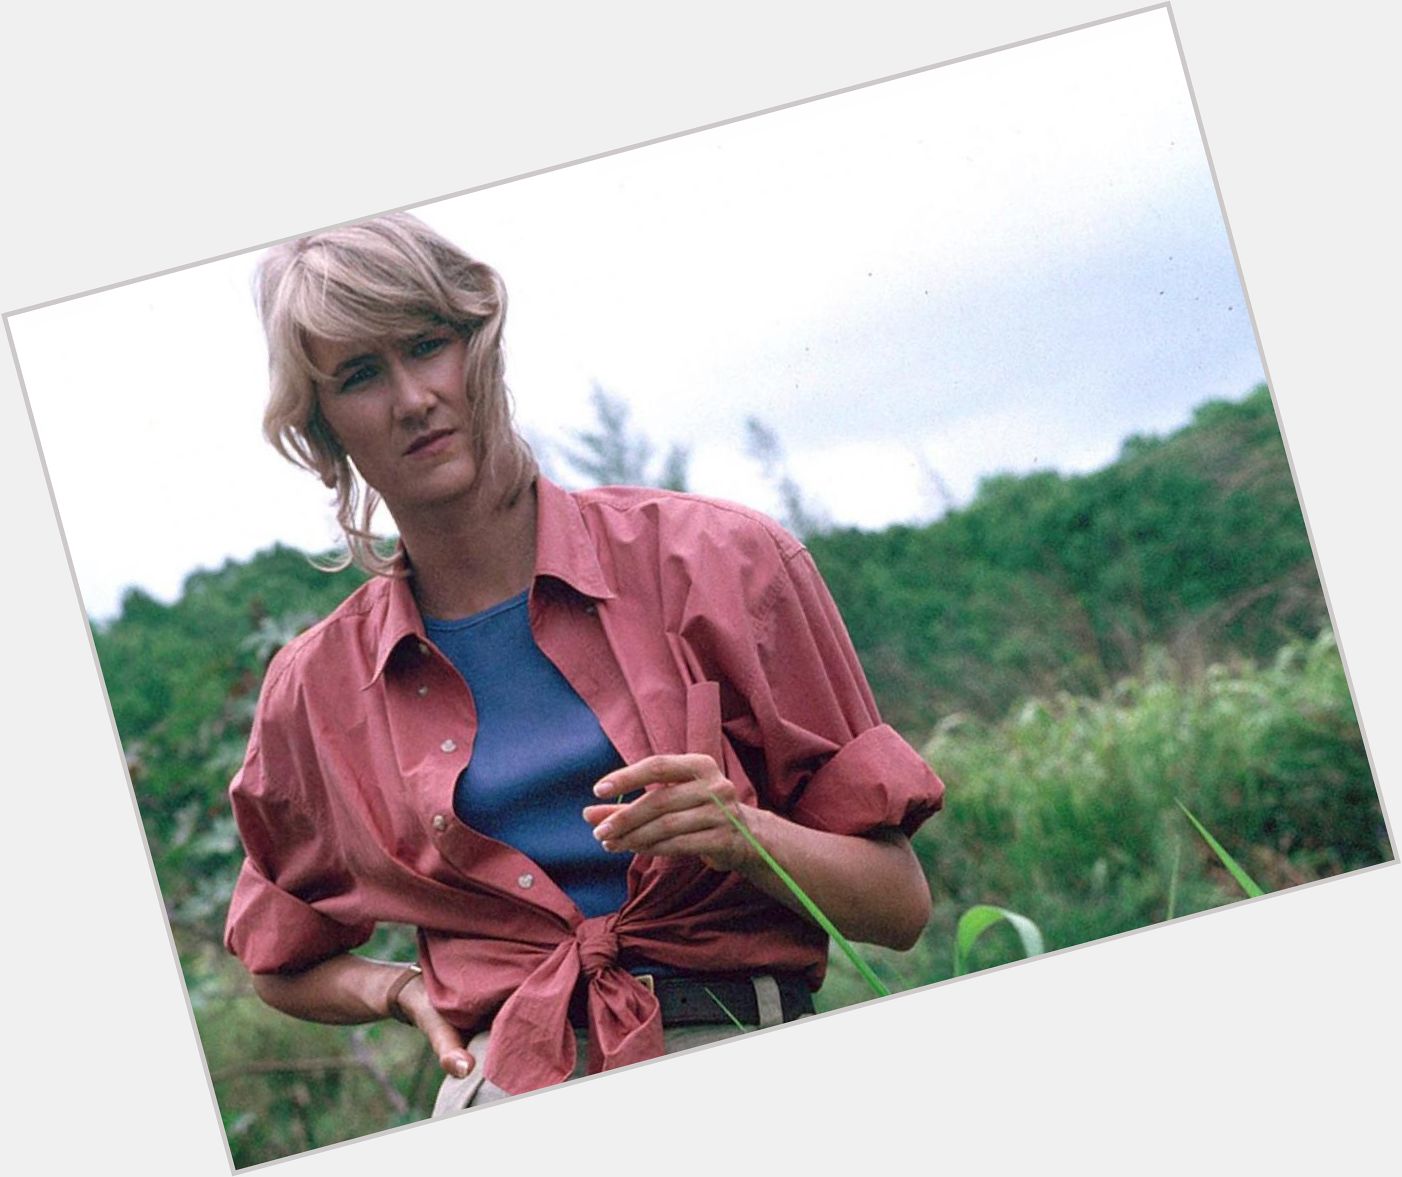 Happy Laura Dern\s Birthday to all who celebrate!!!

(And if you don\t celebrate, get wreckt   ) 